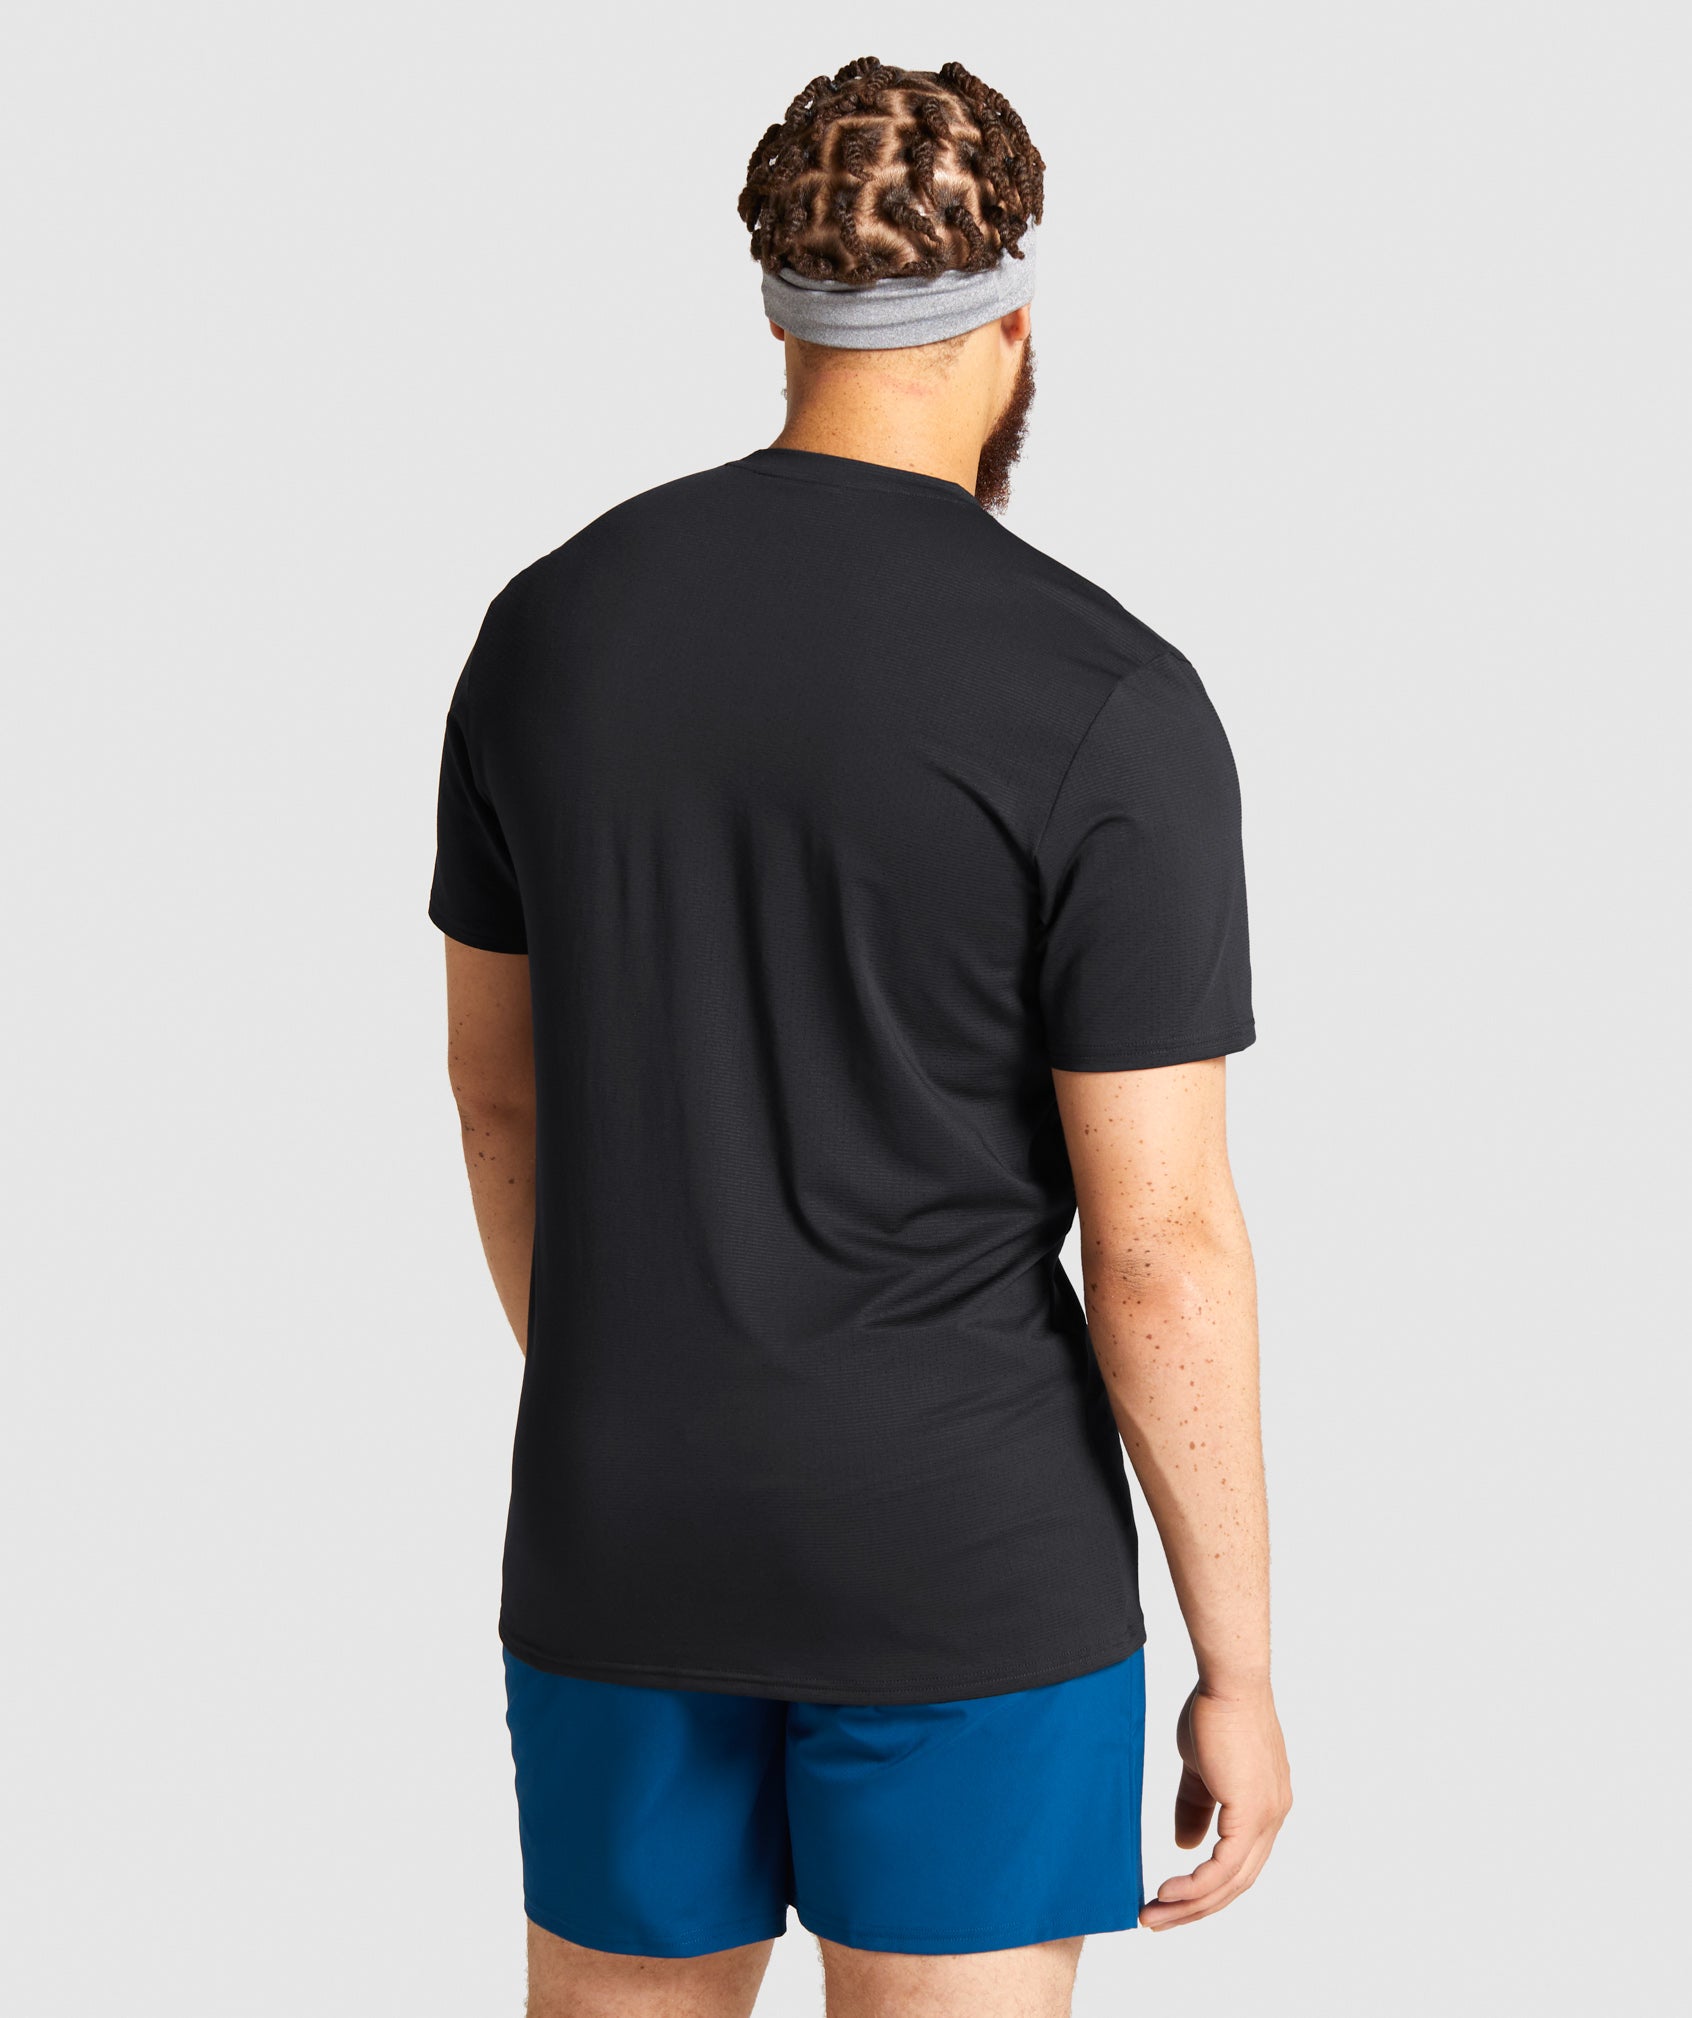 Arrival T-Shirt in Black - view 3